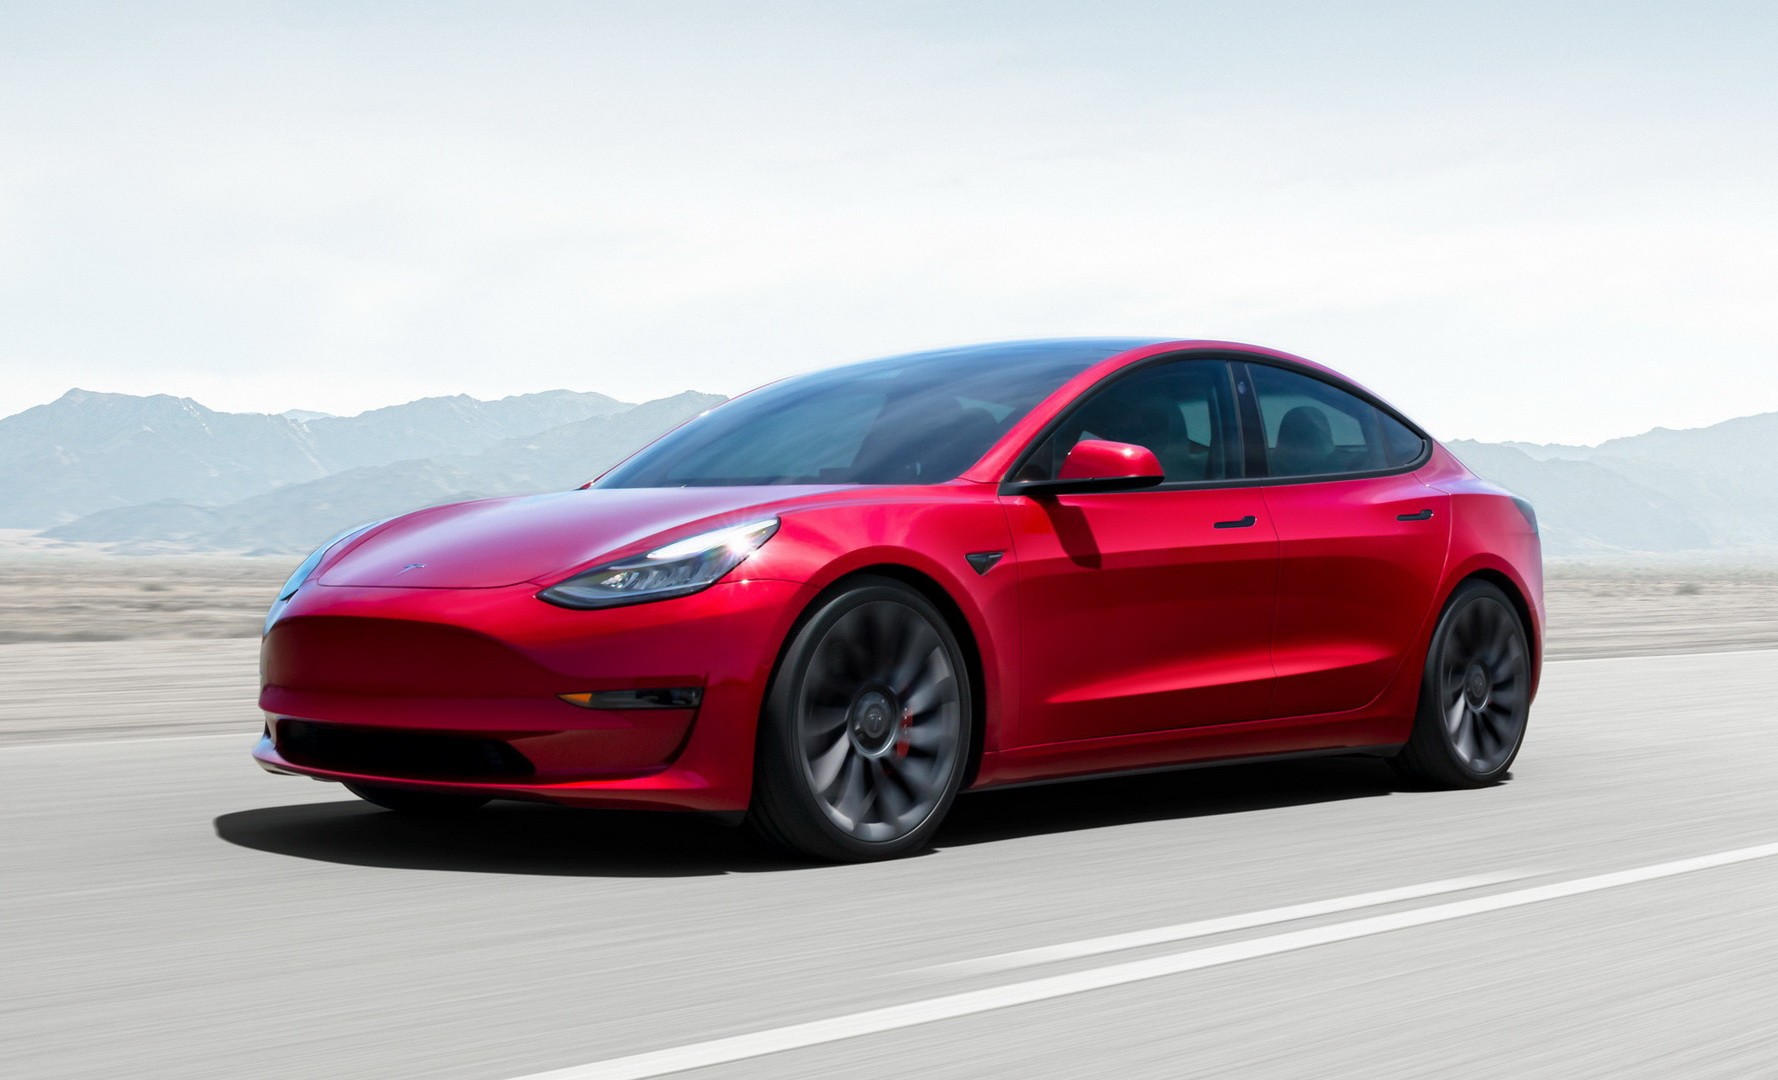 right-now-tesla-s-evs-don-t-qualify-for-california-s-clean-vehicle